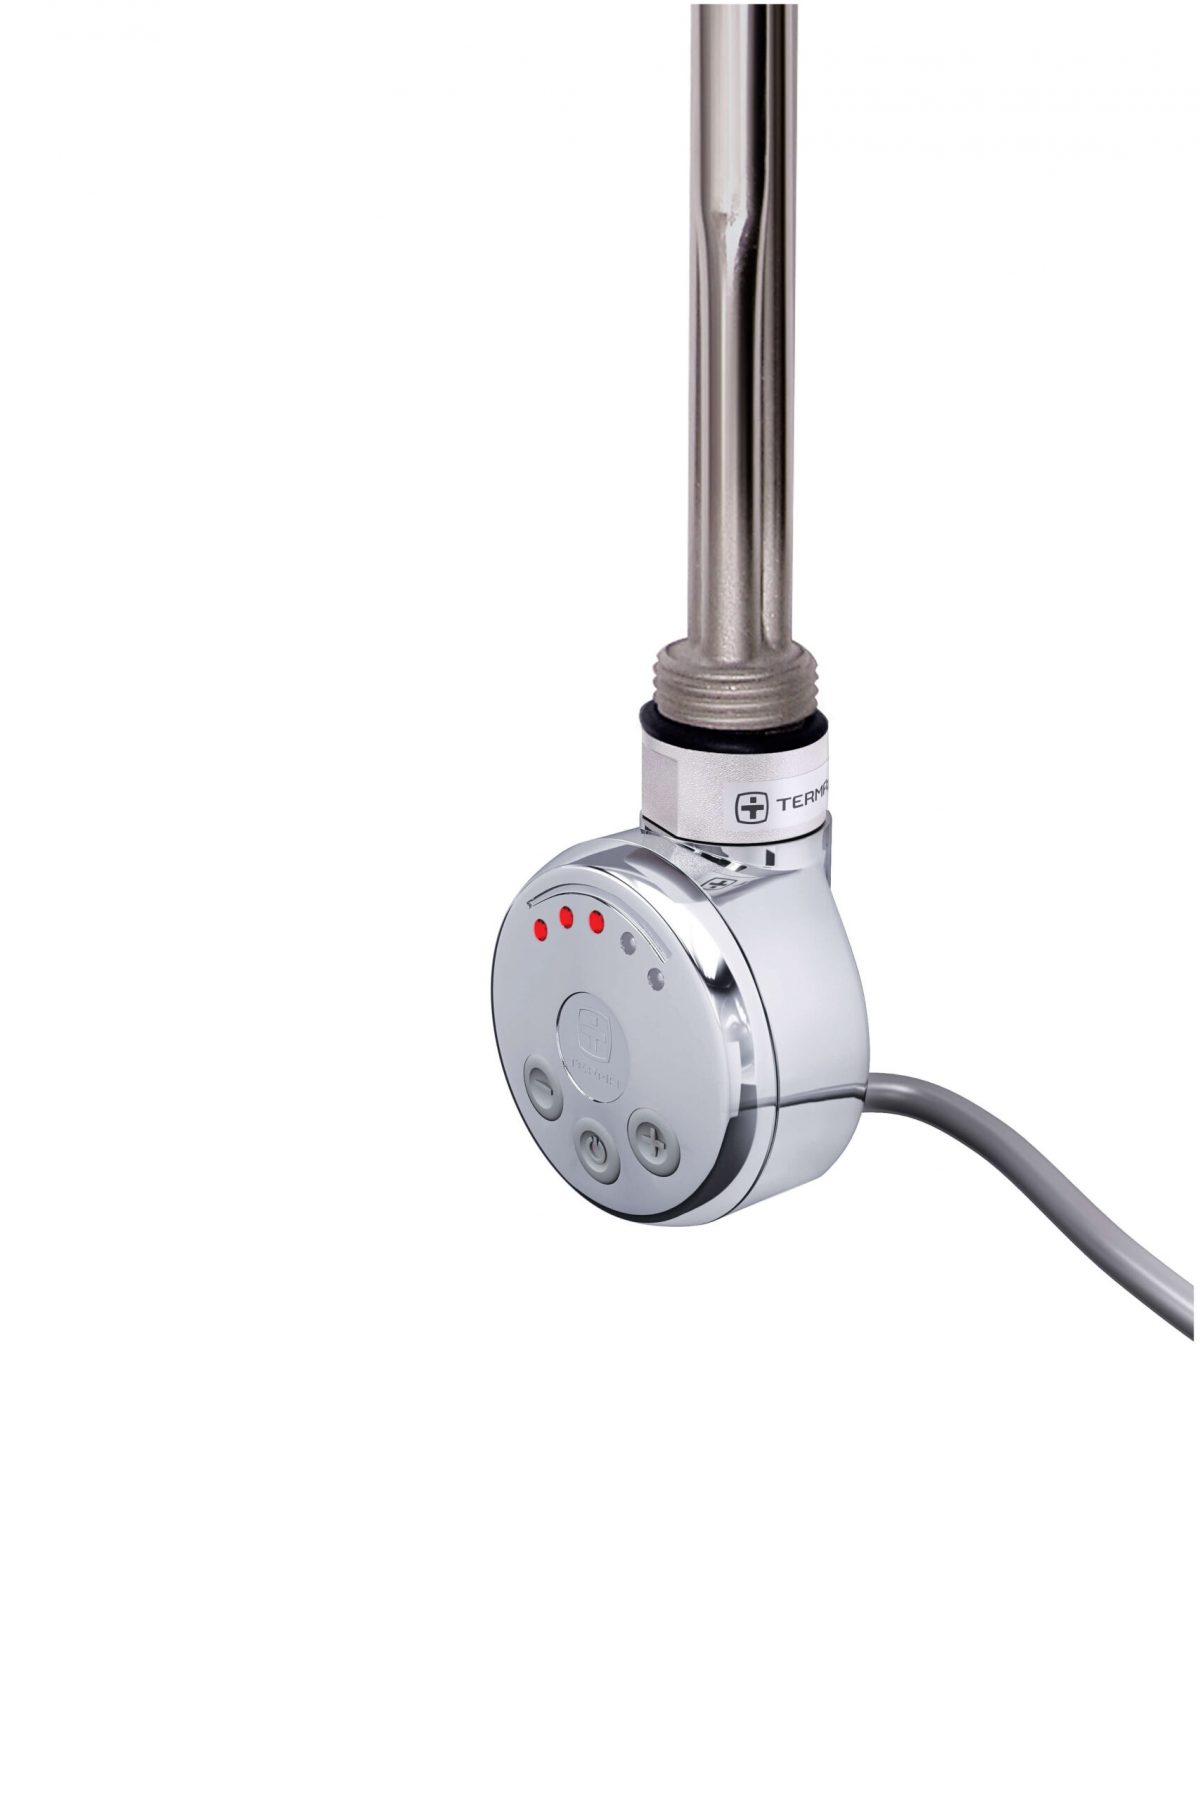 Terma MEG Thermostatic Heating Element – Chrome with Grey Cable